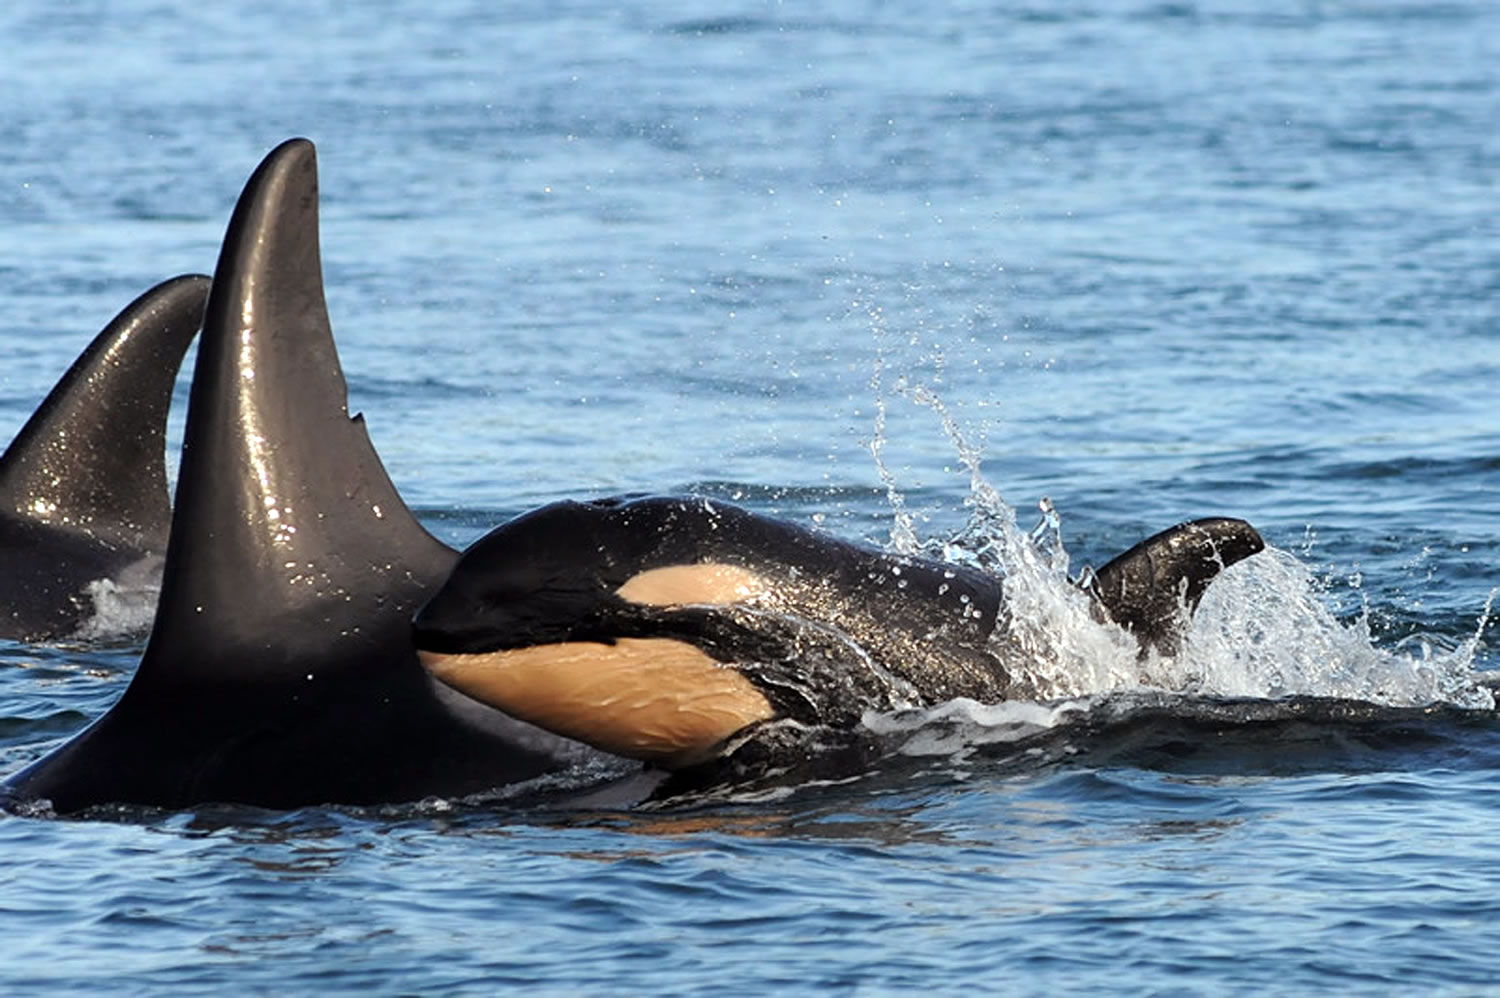 A new baby orca whale is seen swimming alongside an adult whale in the Haro Strait between San Juan Islands and Vancouver Island. The new baby is the eighth born since last December to the small, endangered population of killer whales that spend time in the inland waters of Washington state, according to the Center for Whale Research, which keeps a census of the orcas for the federal government. Decades ago, there were more than 140 of the unique animals known as southern resident killer whales. That number declined to a low of 71 in the 1970s when dozens of the mammals were captured to be displayed at marine parks and aquariums across the country.